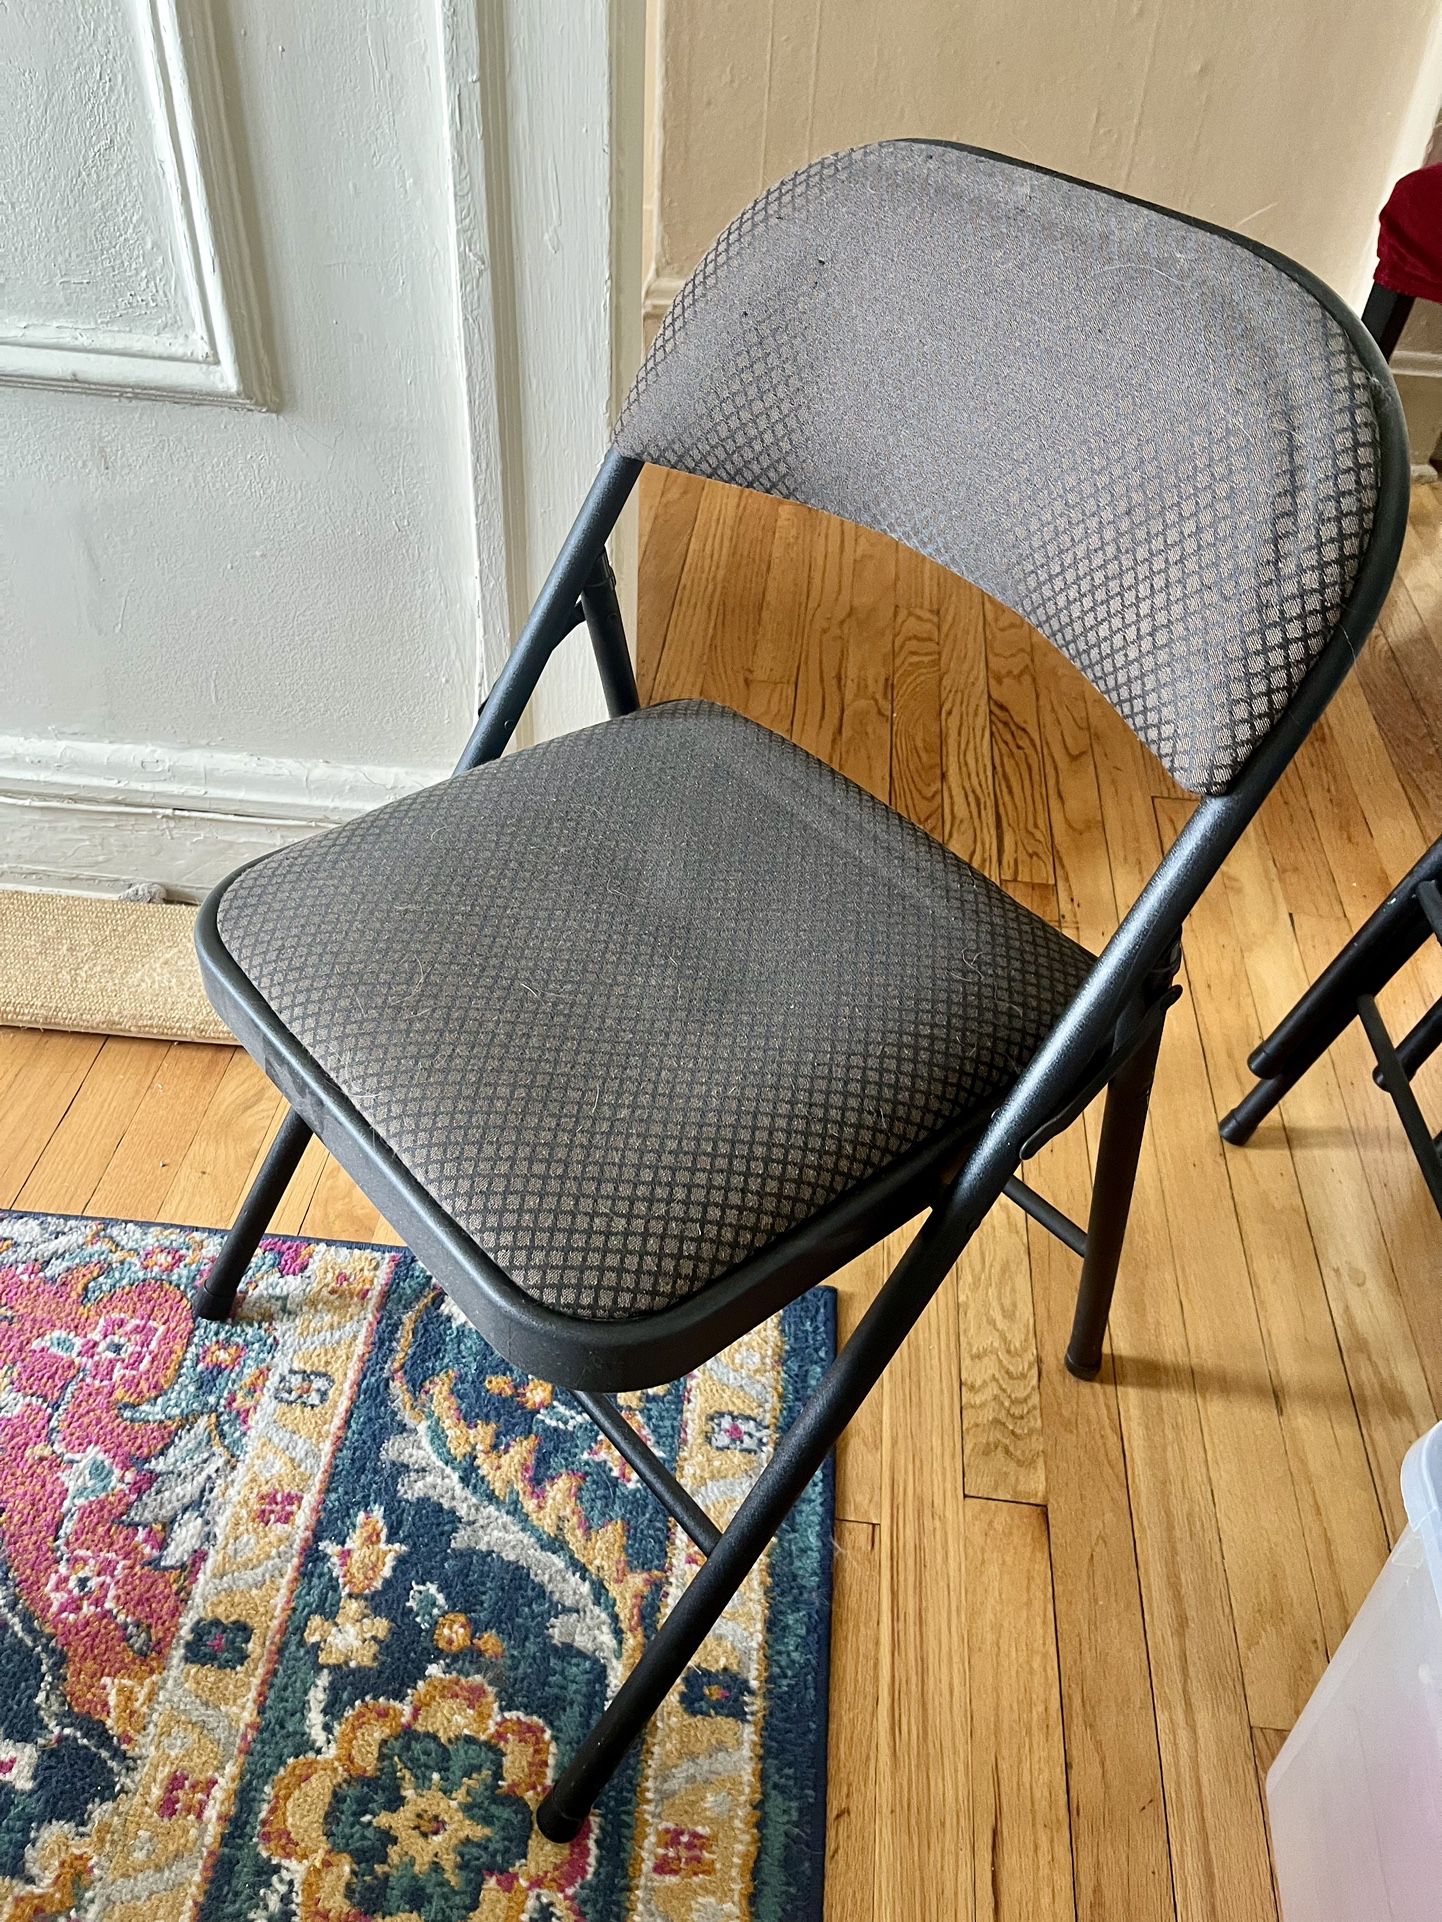 Upholstered Folding Chairs - Set Of 4